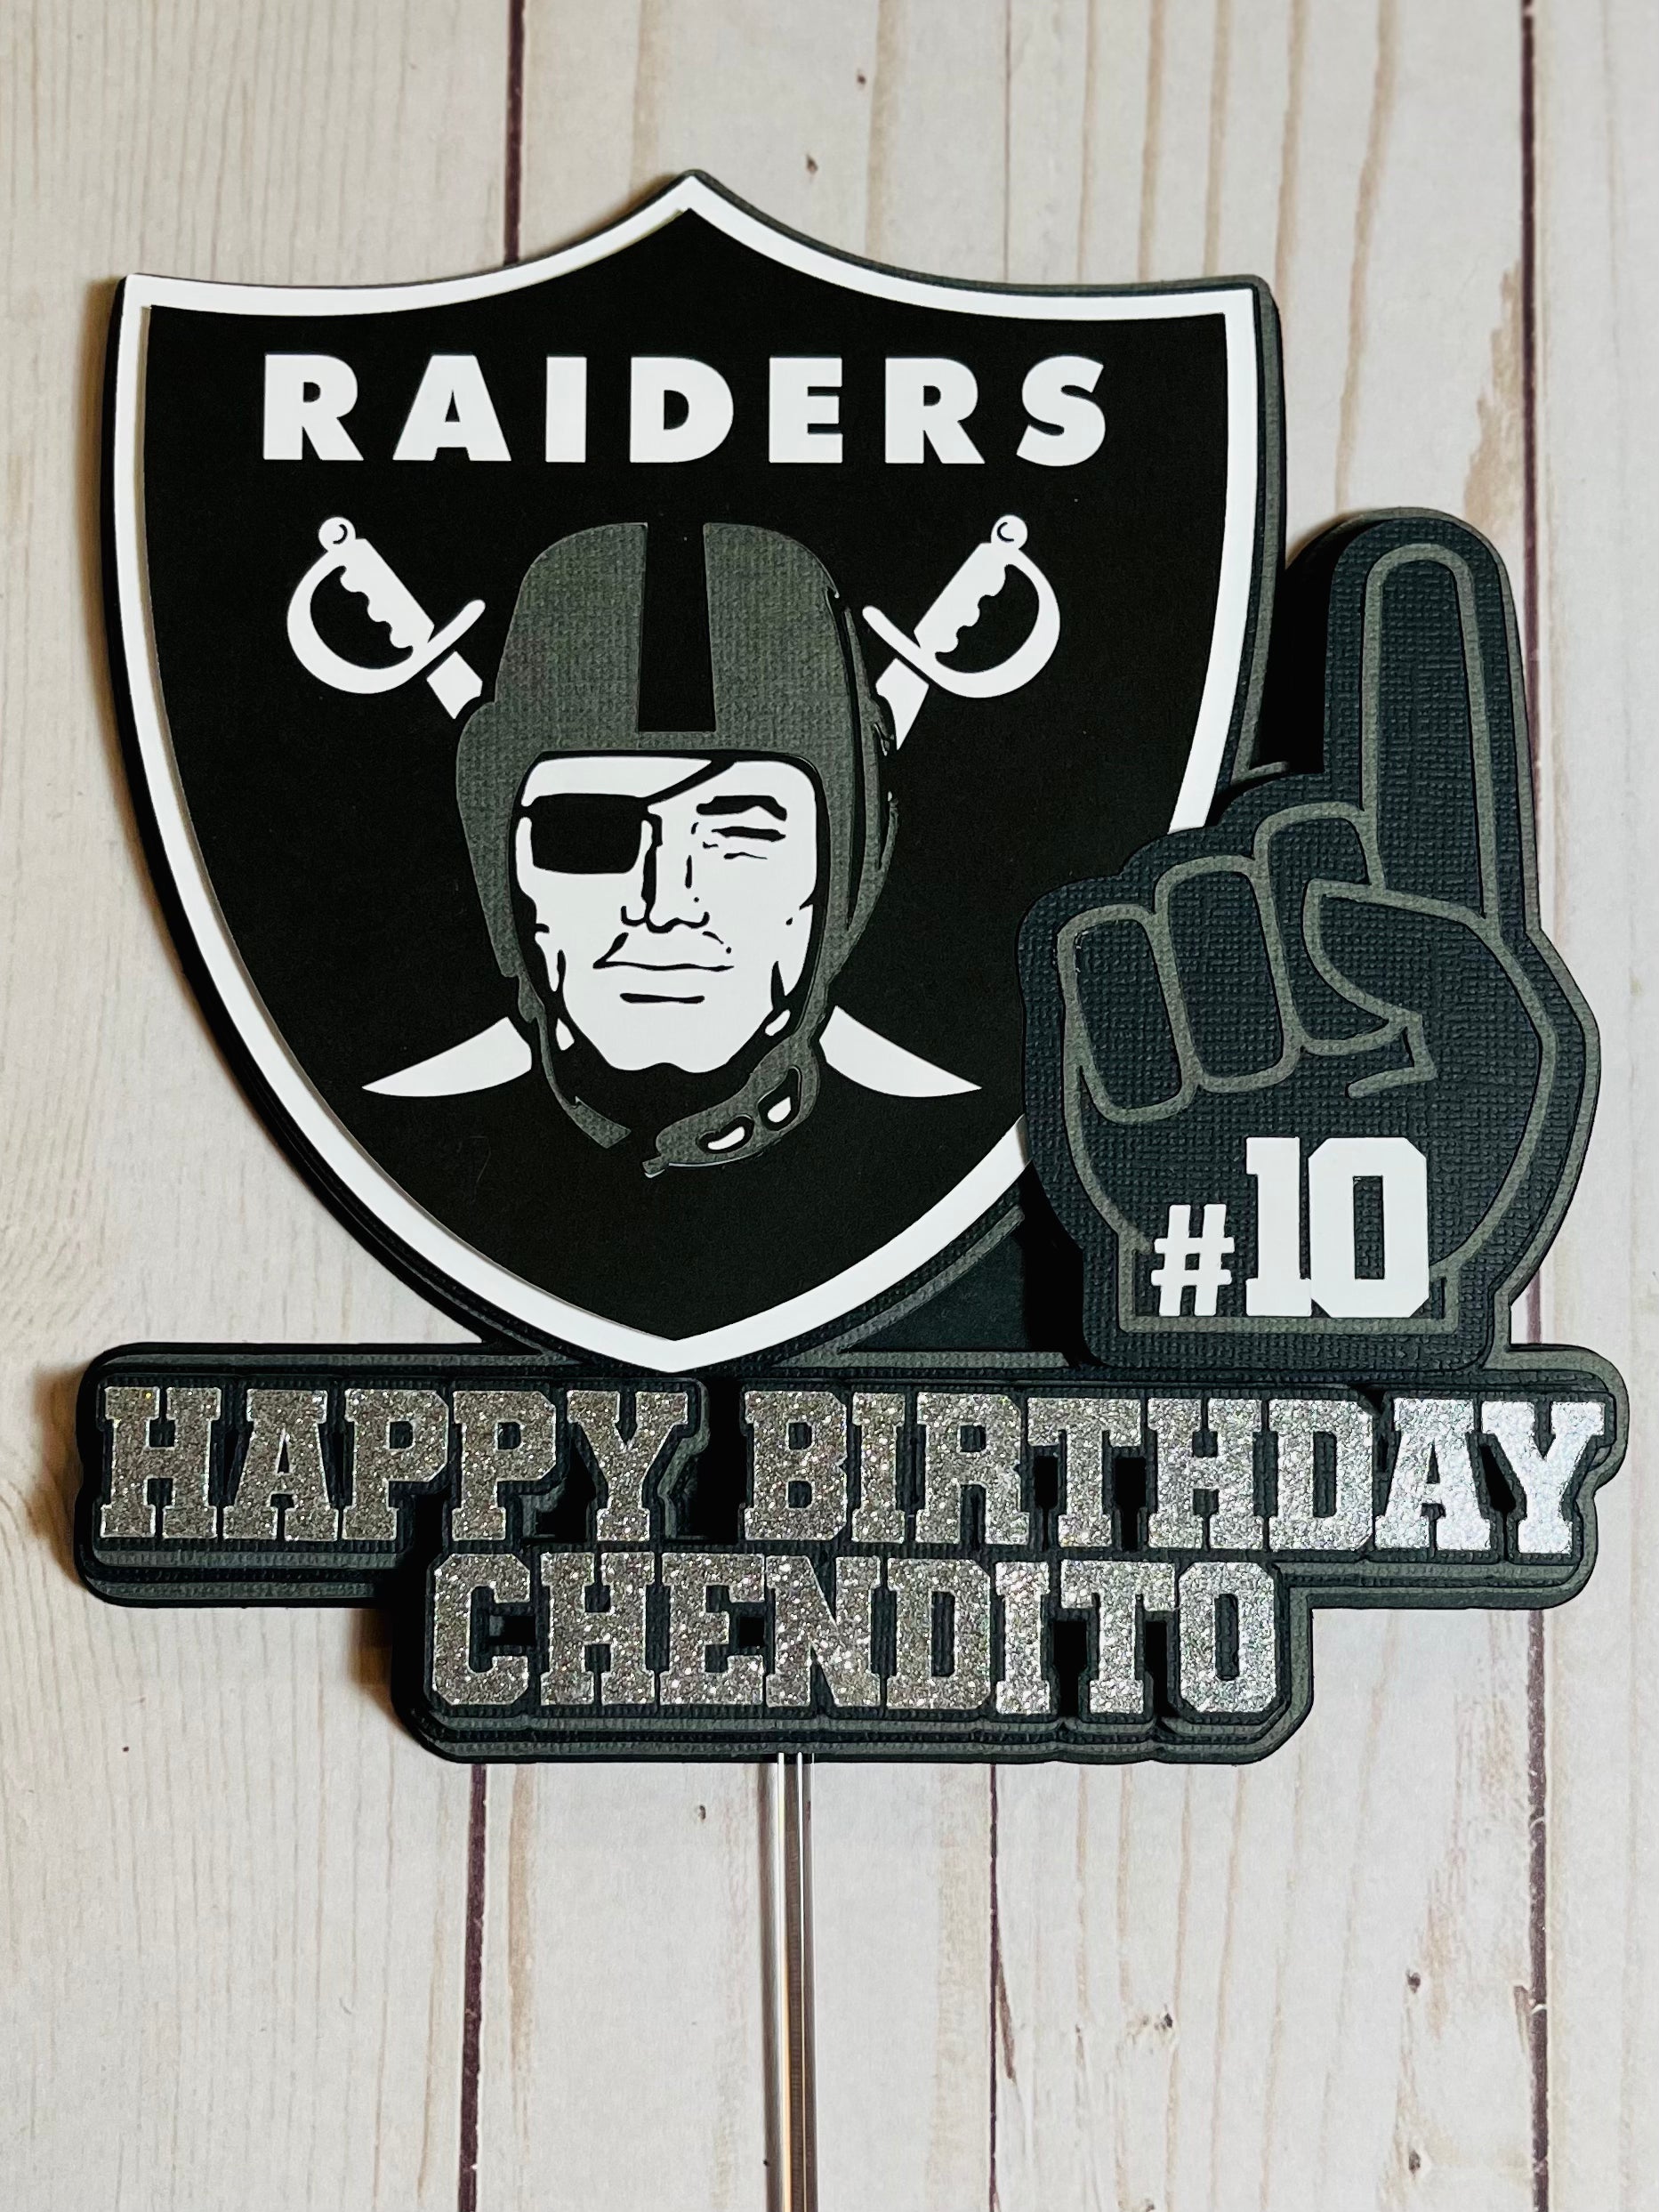 lv raiders cupcake toppers